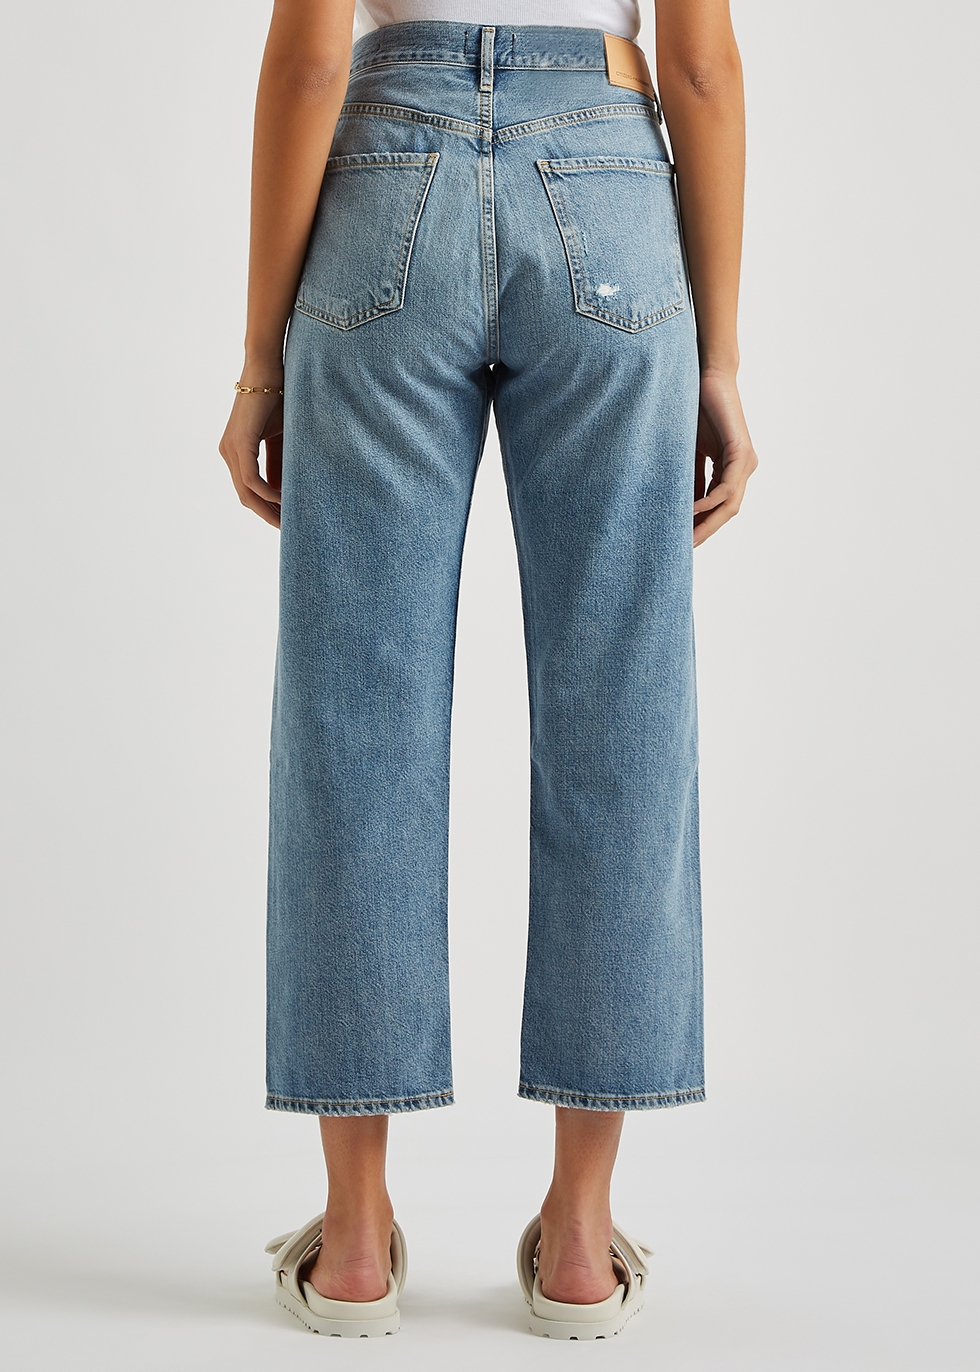 Citizens of Humanity Liya High Rise Jeans in Fade Out  THE JEANS BLOG